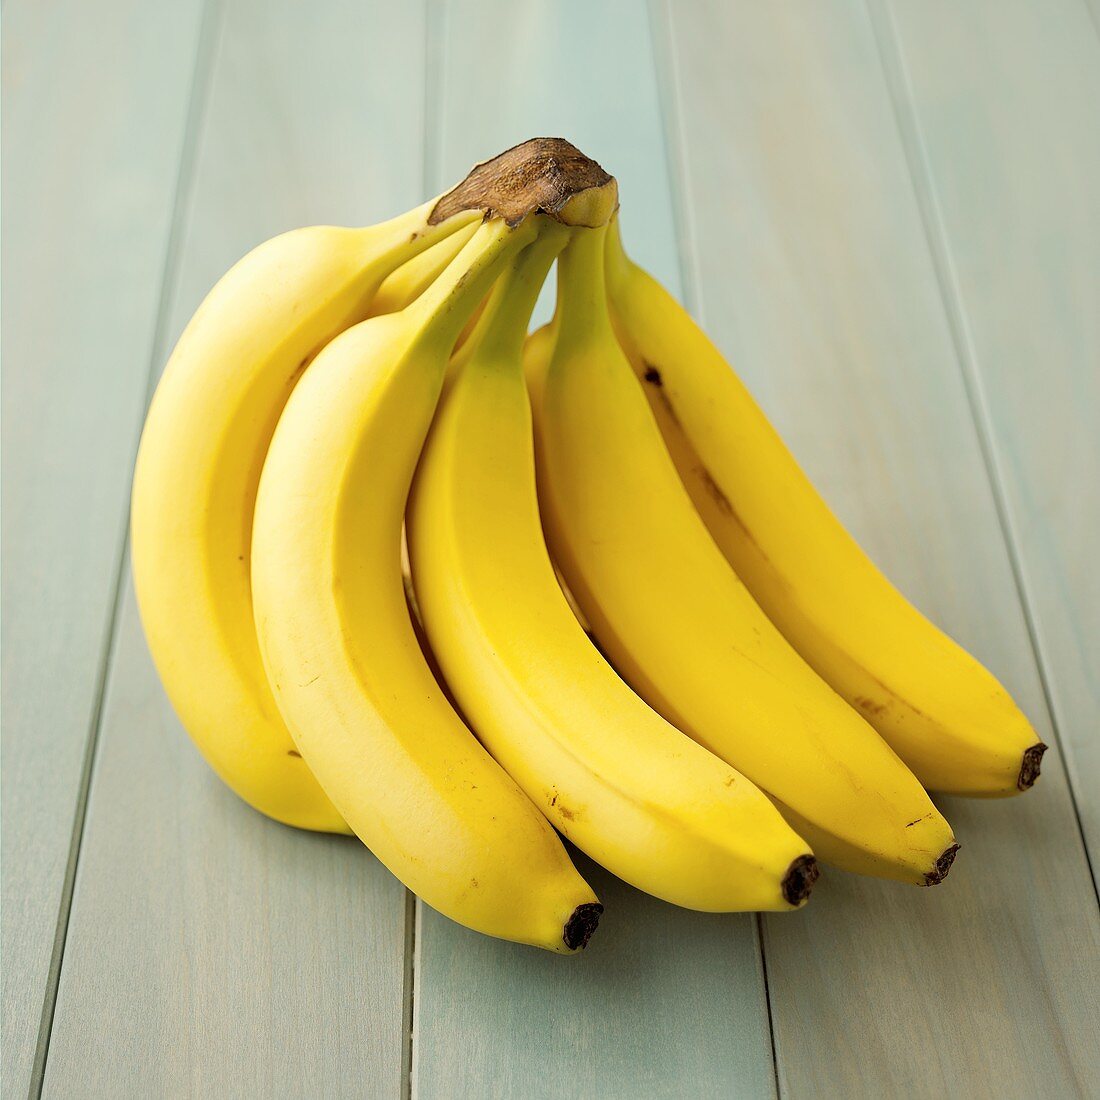 A bunch of bananas on blue painted wood